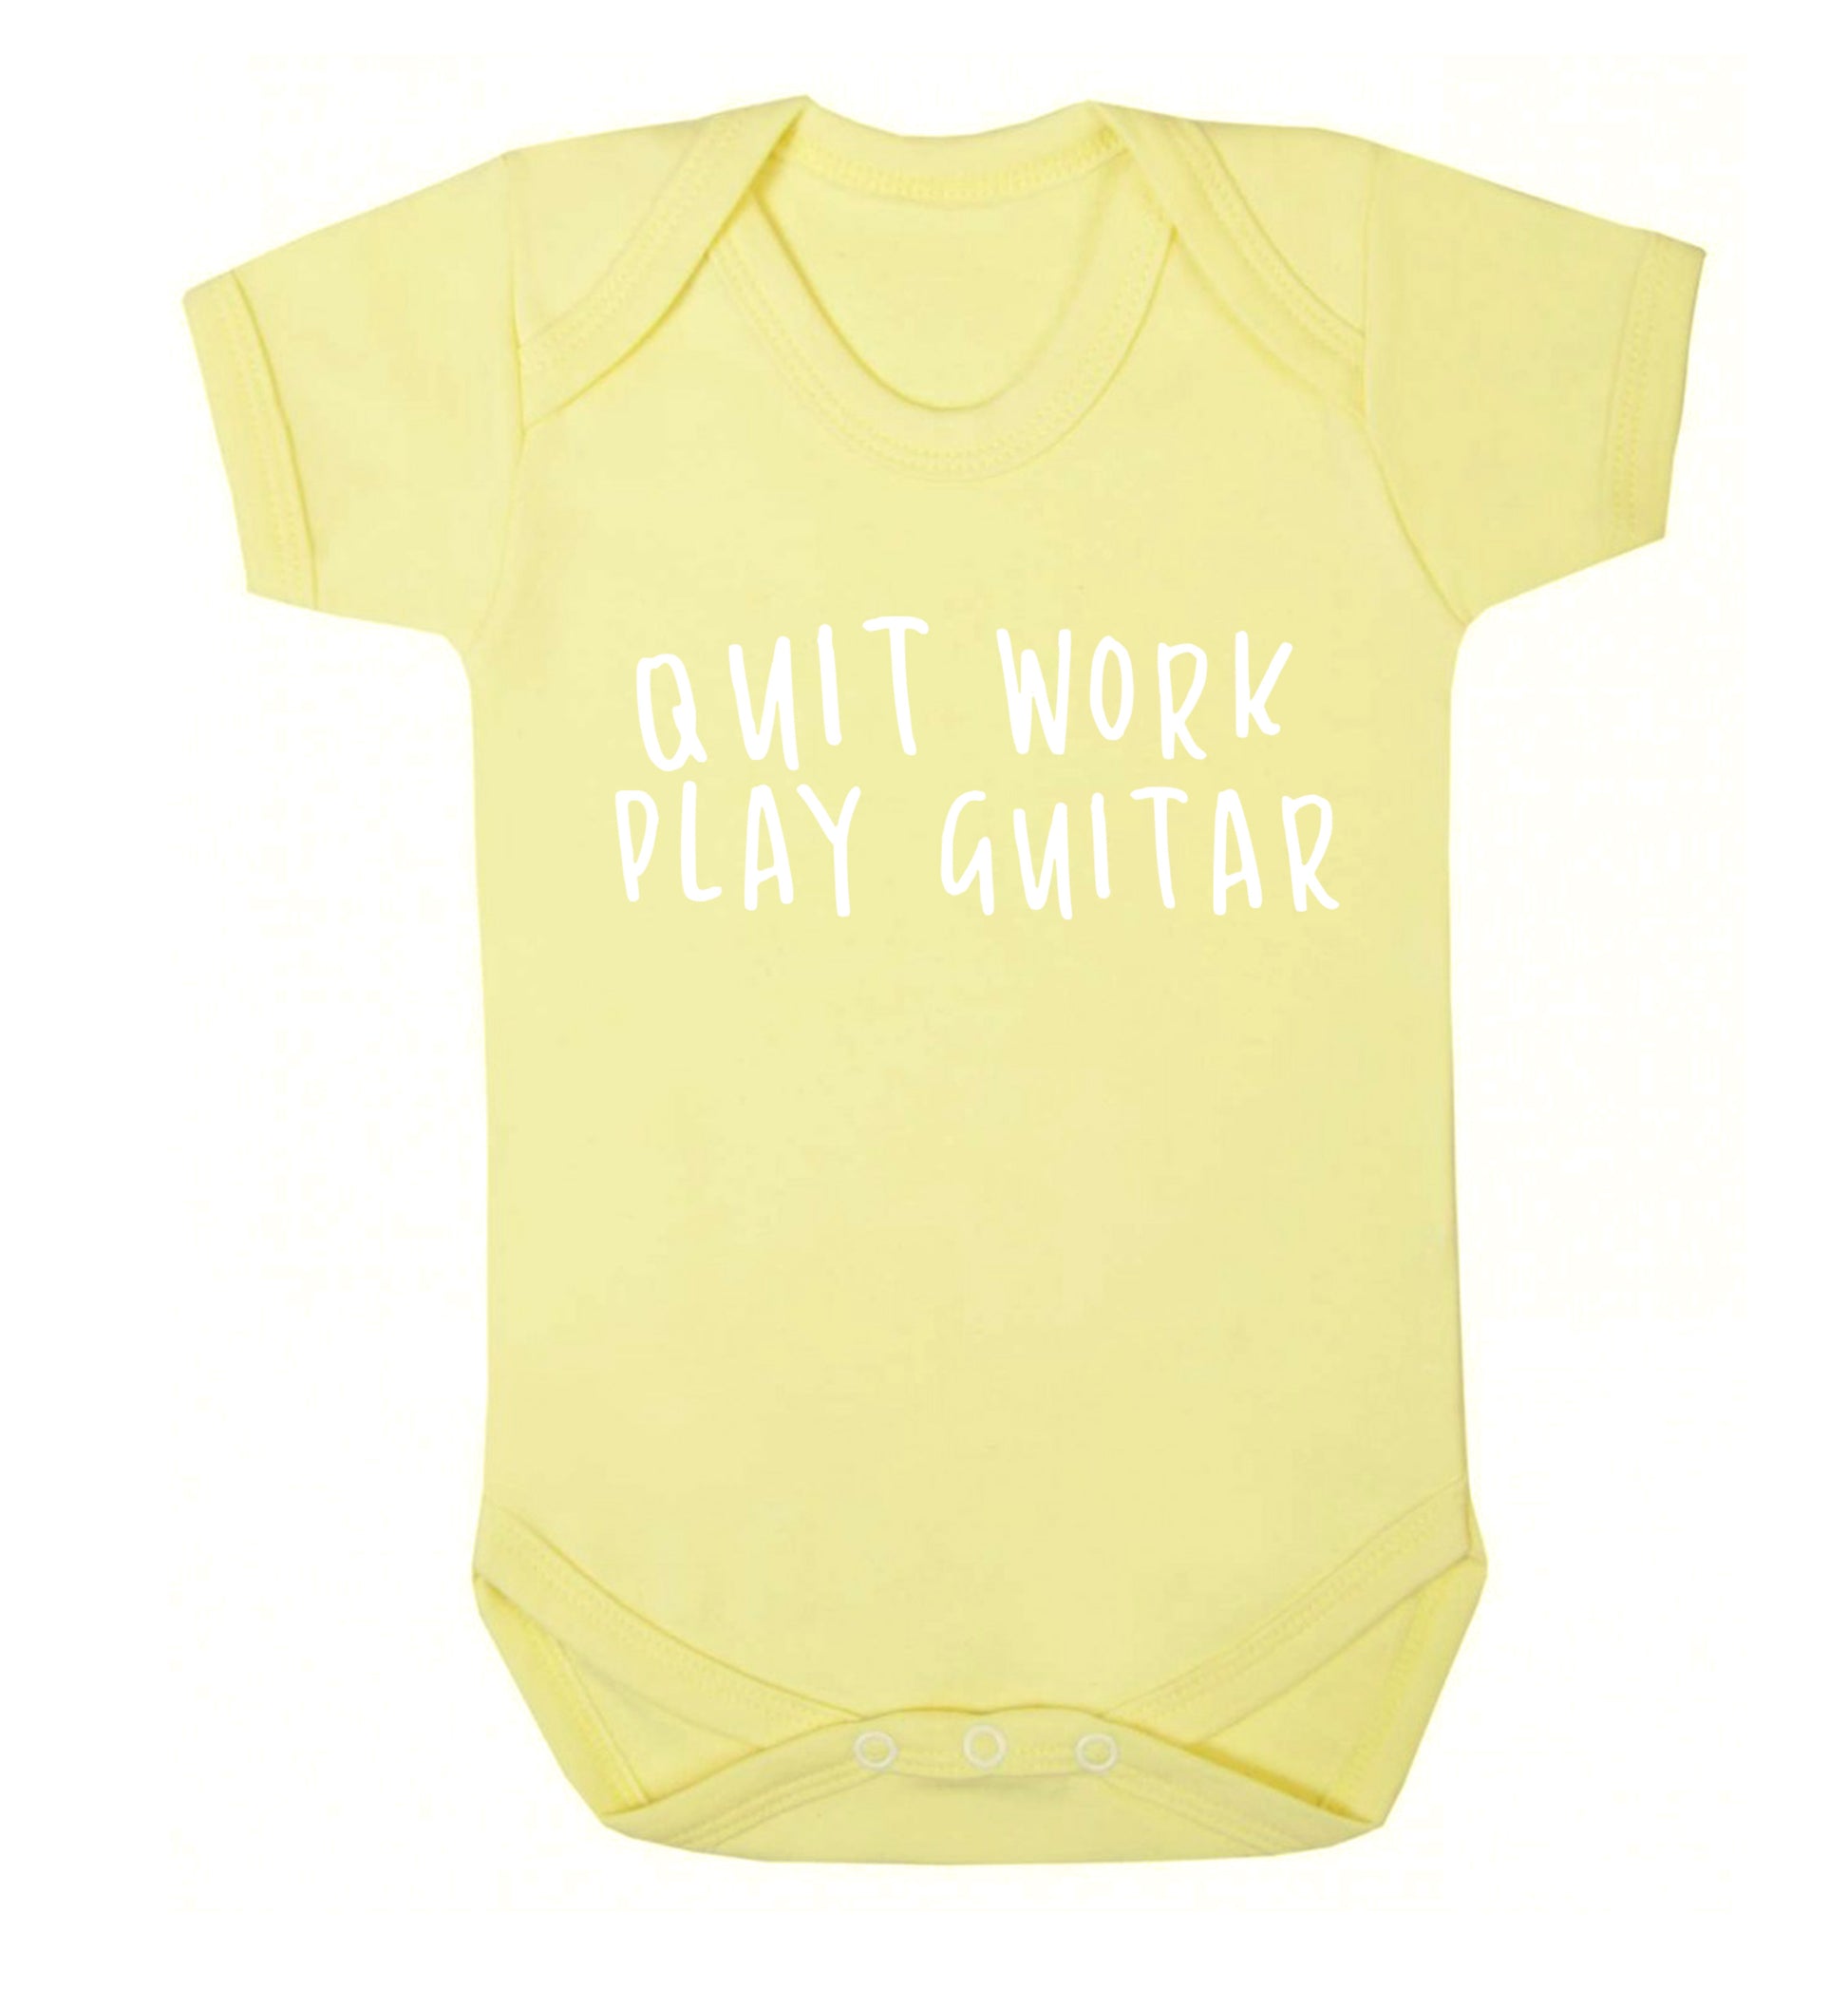 Quit work play guitar Baby Vest pale yellow 18-24 months